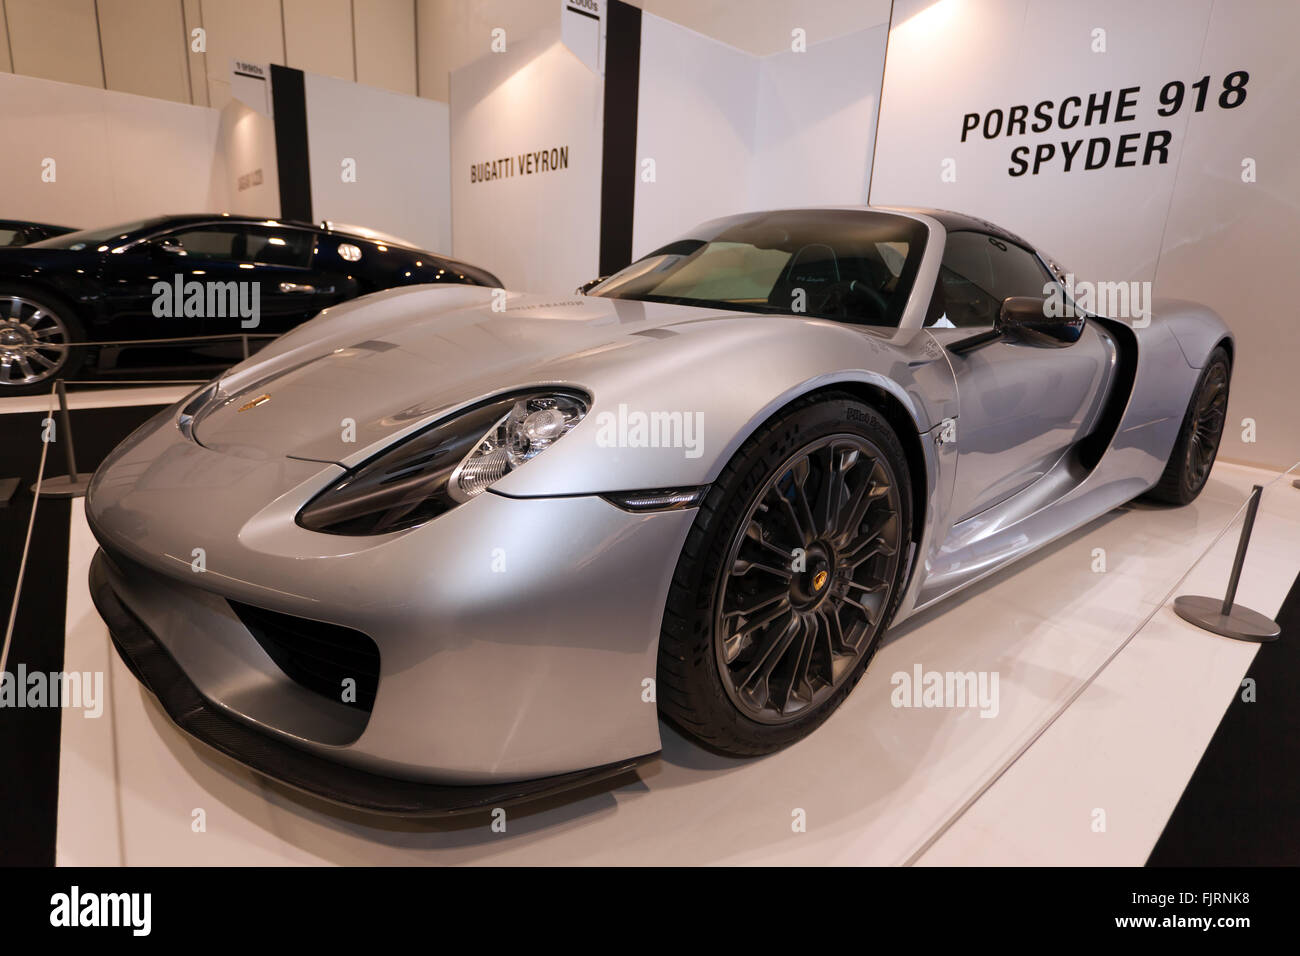 A Porsche 918 Spyder on static display  in the 'Evolution of the Supercar' section of the 2016 London Classic Car Show. Stock Photo